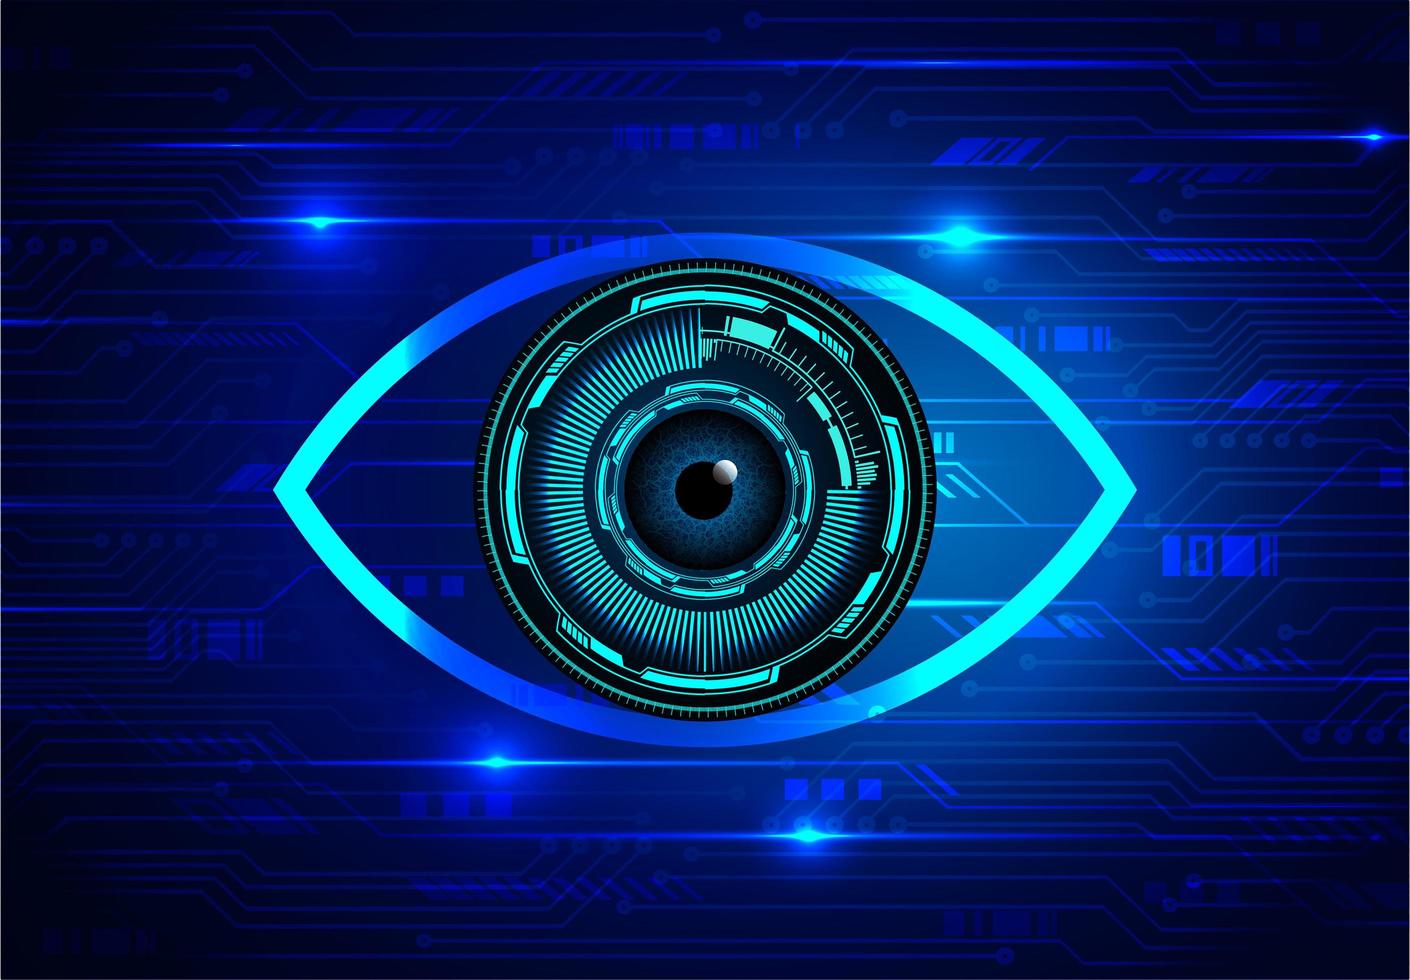 Blue eye and future technology concept background vector